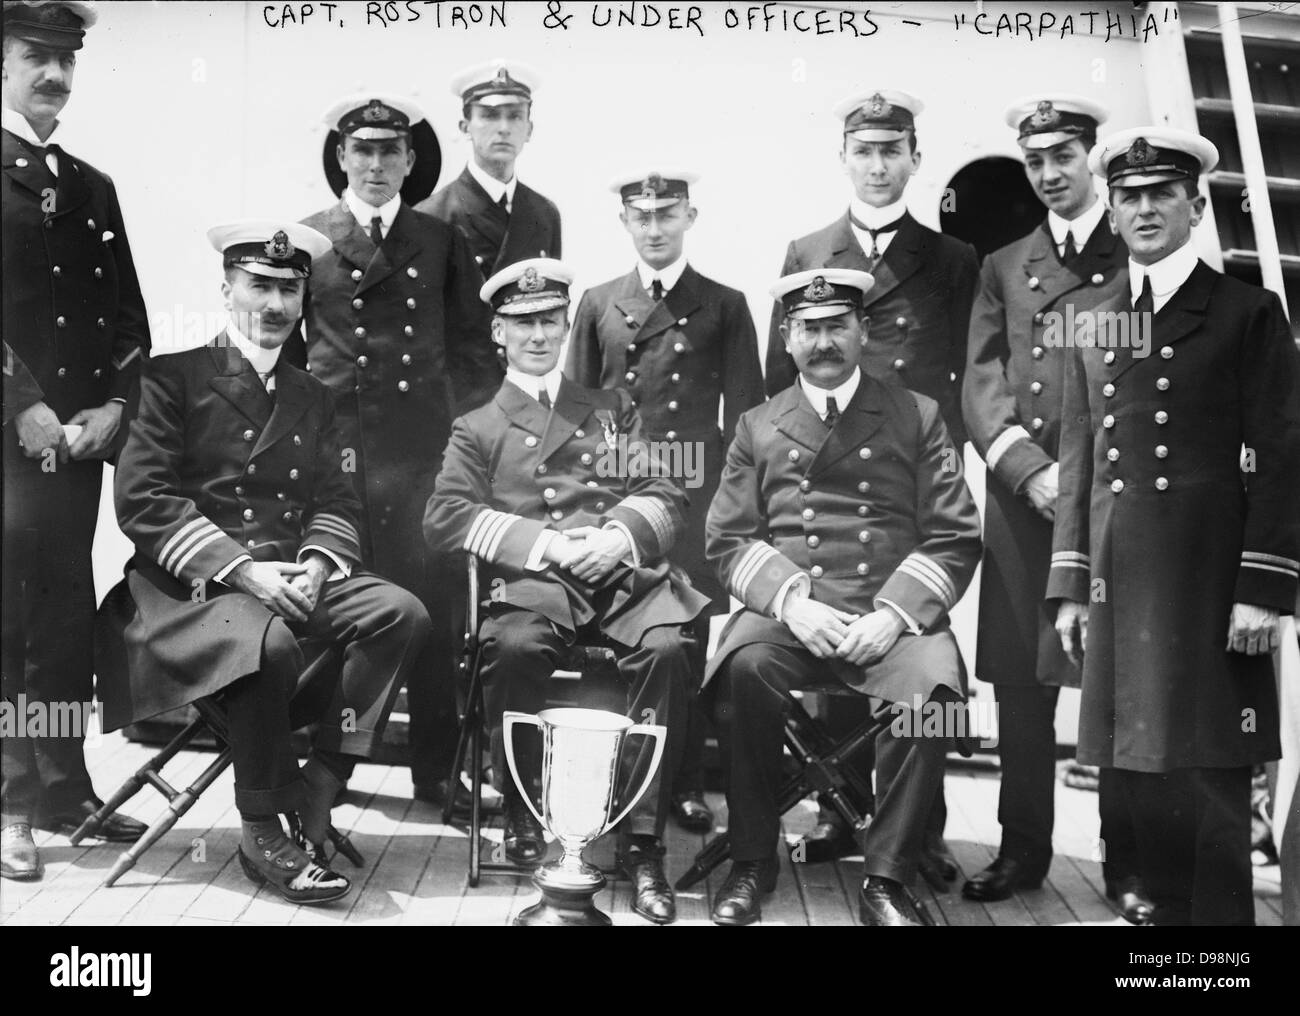 Captain Arthur Rostron and under officers of RMS Carpathia (Cunard), with loving cup presented to him by survivors of wreck of RMS Titanic (White Star Line), 12 April 1912 in recognition of his heroism in the rescue. Shipwreck Disaster Stock Photo